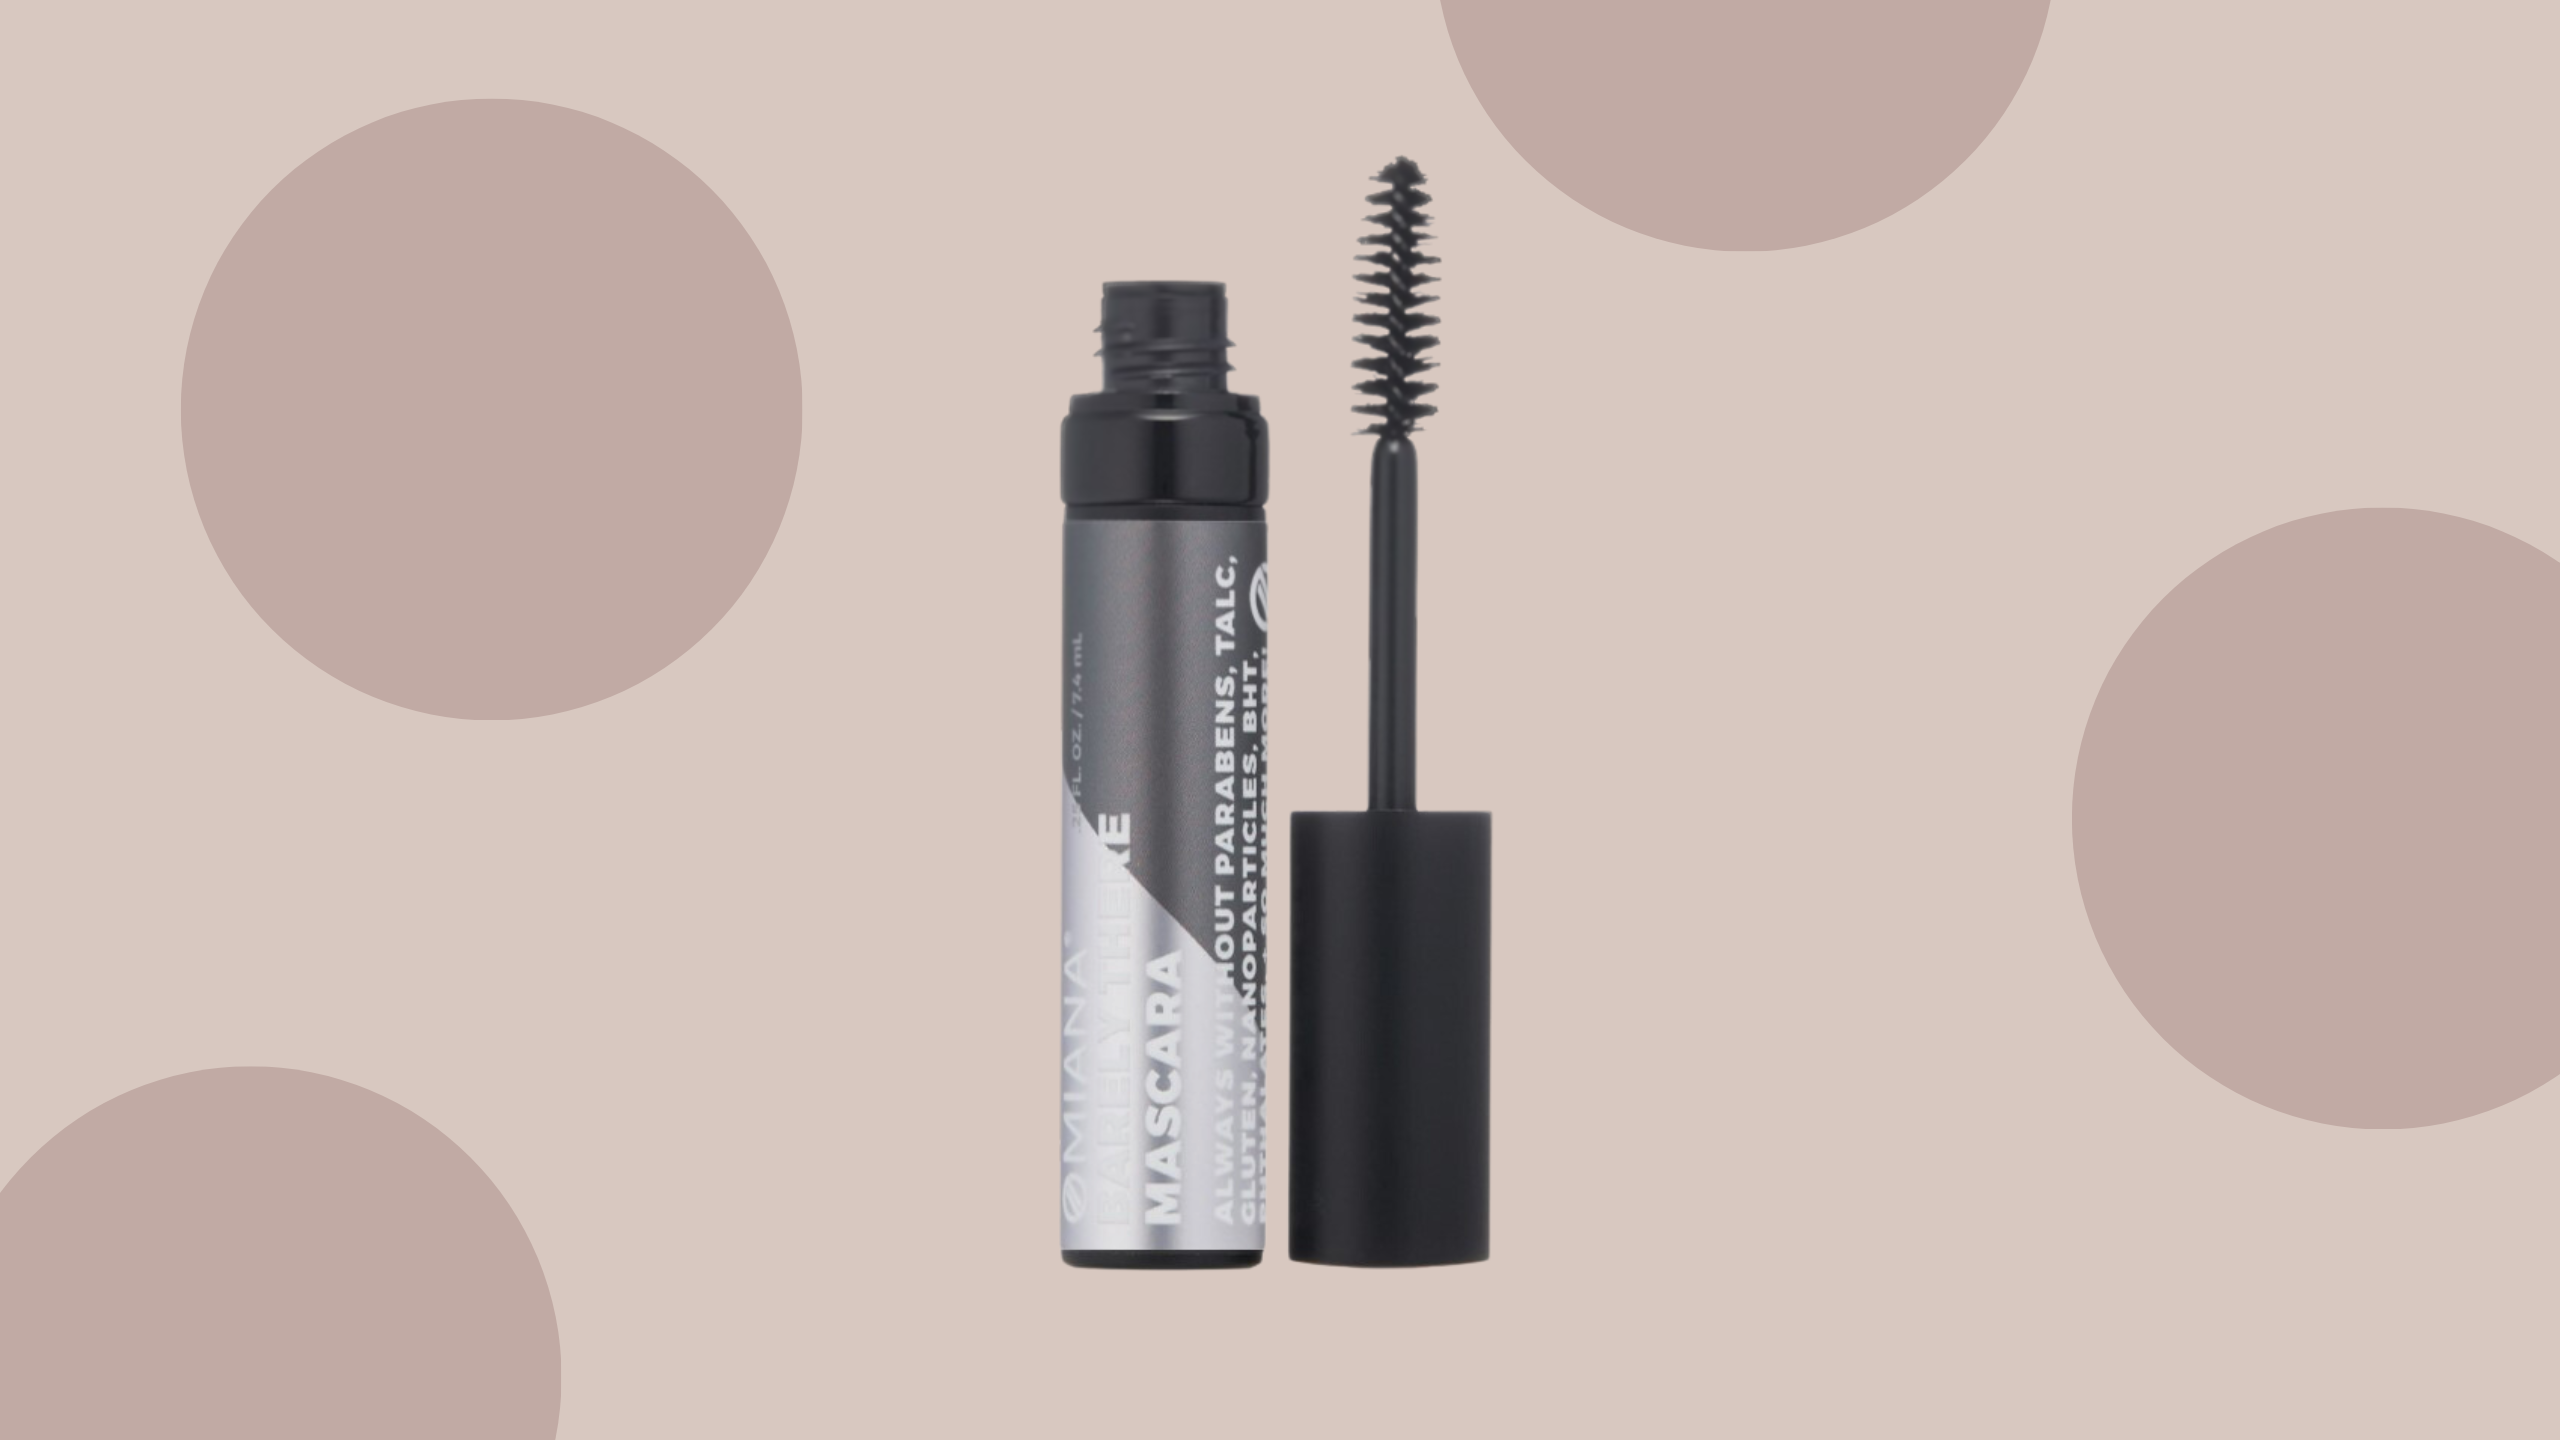 Omiana's Barely There Mascara: No Tocopheryl Acetate, No Tocopherol Acetate - Pure Gorgeousness!